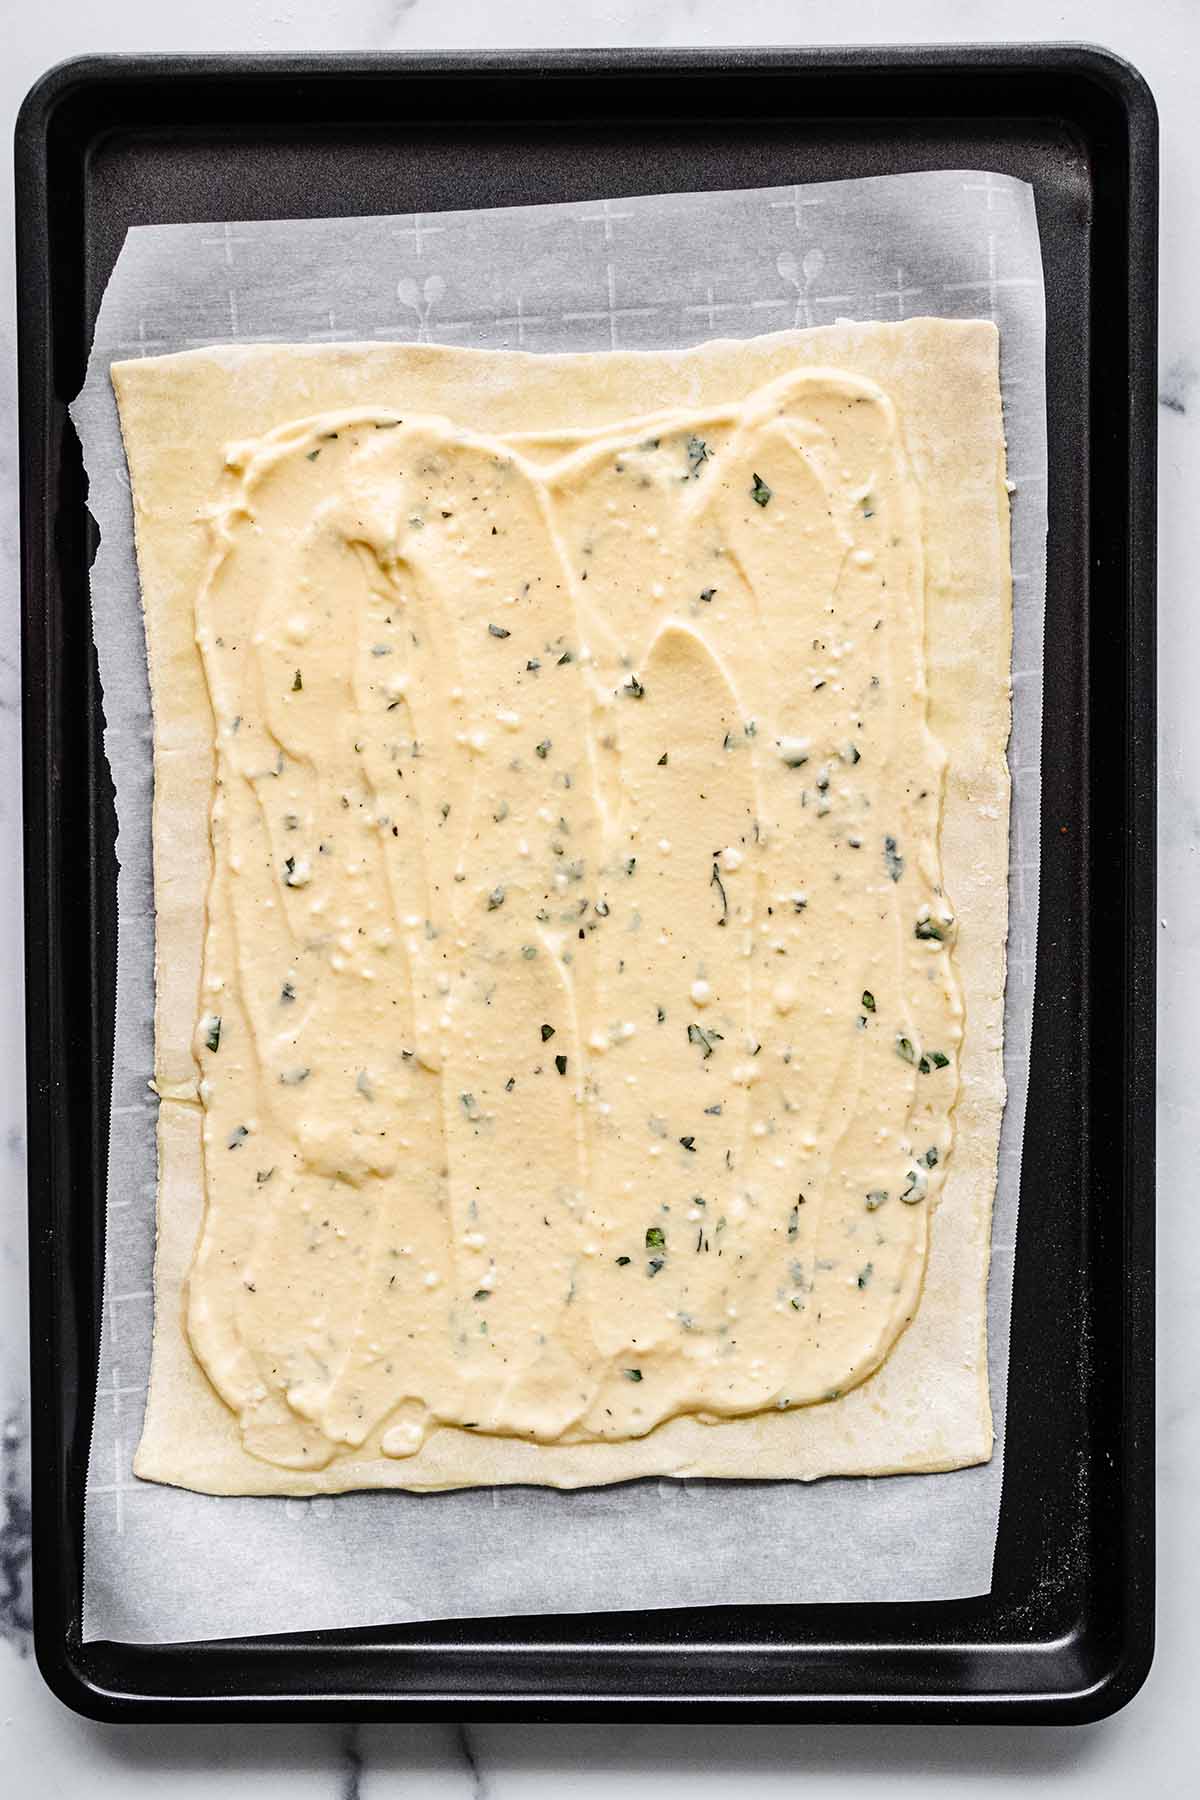 Ricotta mixture spread over the top of puff pastry sheet.